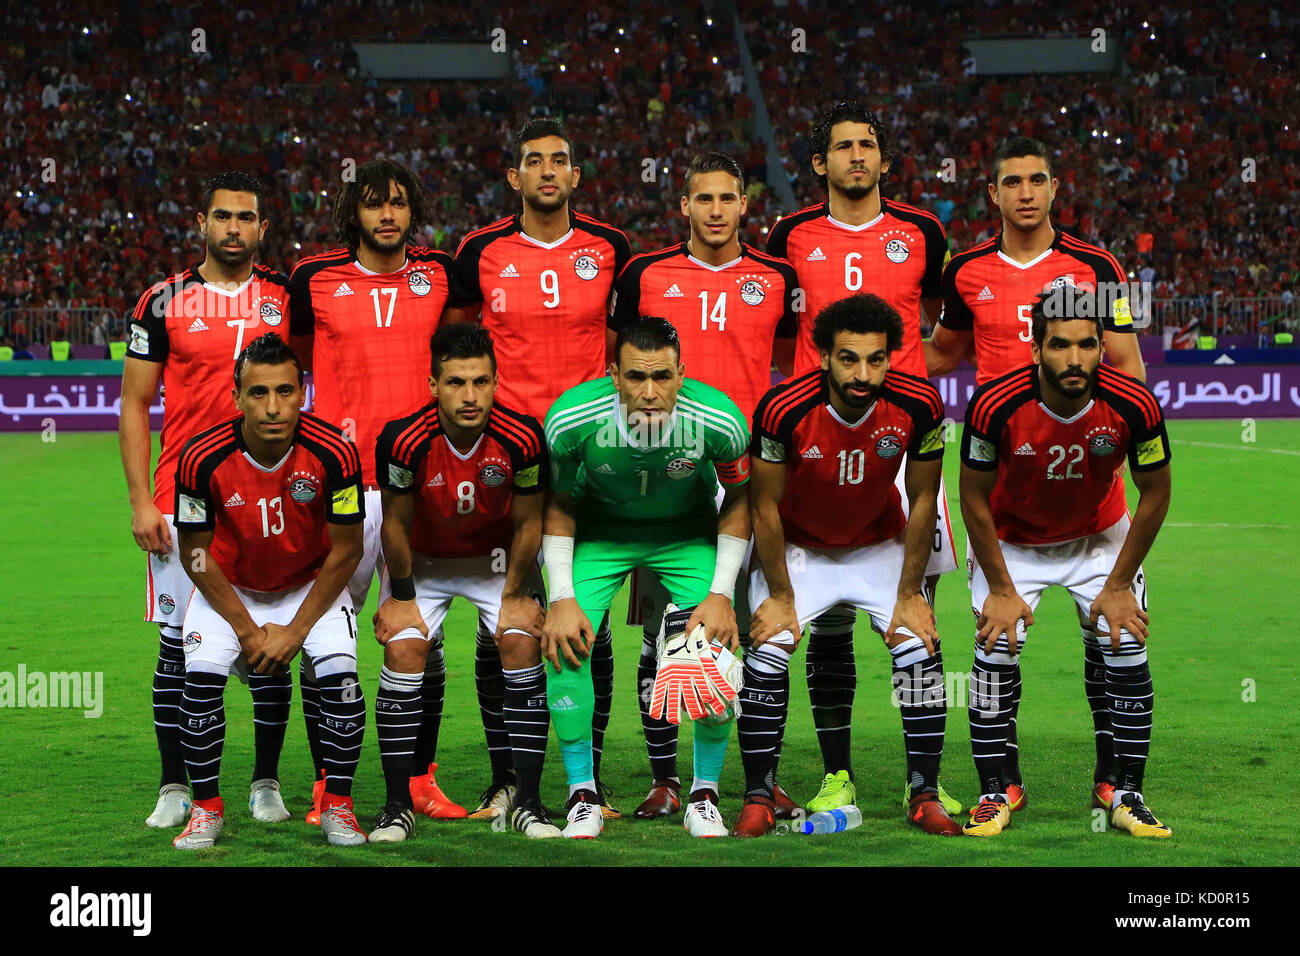 Alexandria, Alexandria, Egypt. 8th Oct, 2017. (L-R) Egypt's Mohamed Abdel-Shafy, Tarek Hamed, Essam El-Hadary, Mohamed Salah, Saleh Gomaa, Ahmed Fathy, Mohamed Elneny, Hassan Ahmed, Ramadan Sobhi, Ahmed Hegazi, Mohamed Abdel-Shafy pose for a team picture during their World Cup 2018 Africa qualifying match between Egypt and Congo at the Borg el-Arab stadium in Alexandria on October 8, 2017 Credit: Amr Sayed/APA Images/ZUMA Wire/Alamy Live News Stock Photo